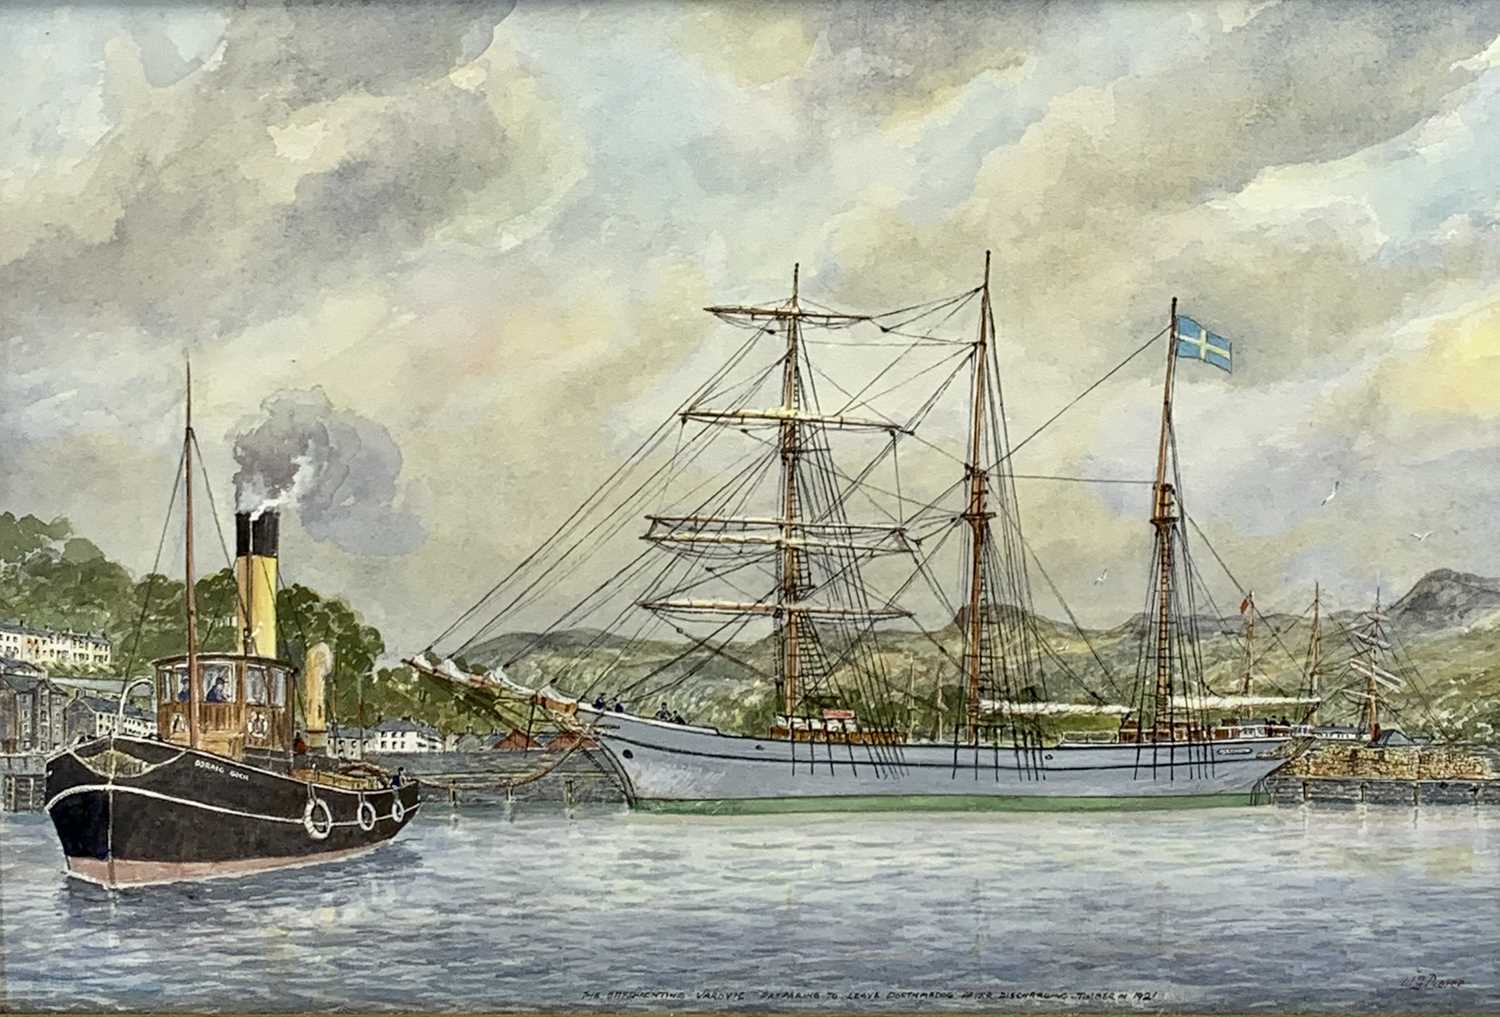 W G PIERCE watercolour - the Barquentine Varovic preparing to leave Porthmadog after discharging - Image 2 of 4